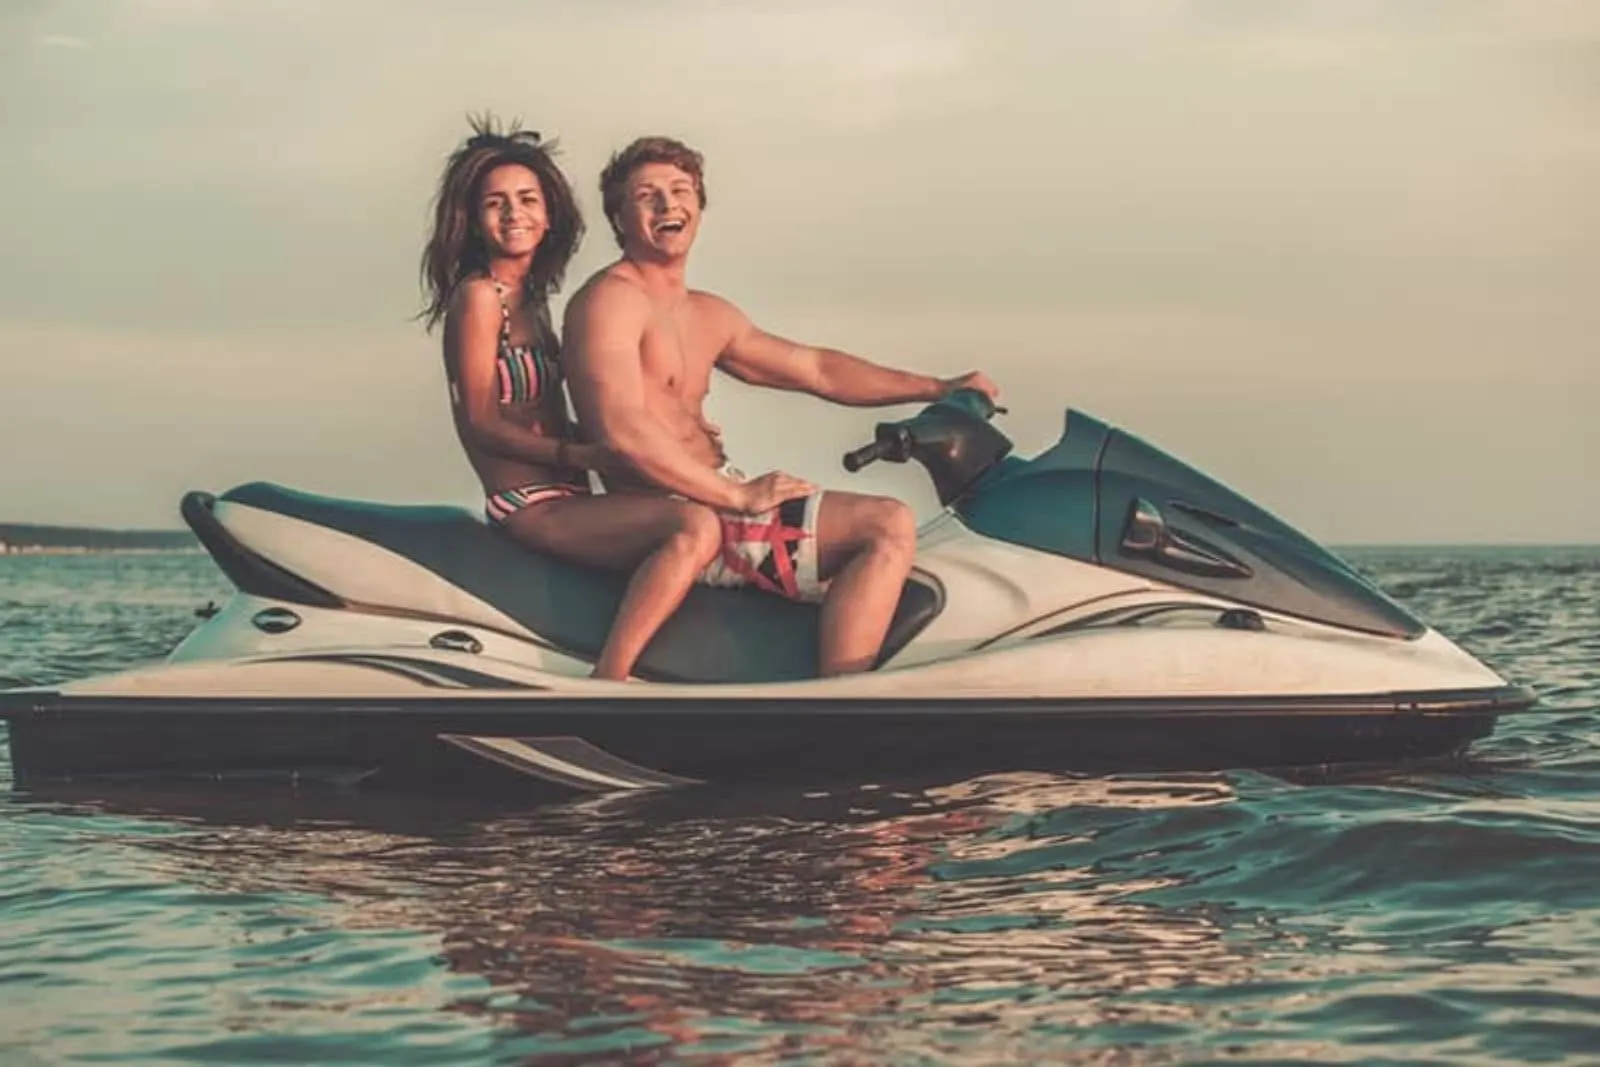 a man and a woman ride on a speedboat